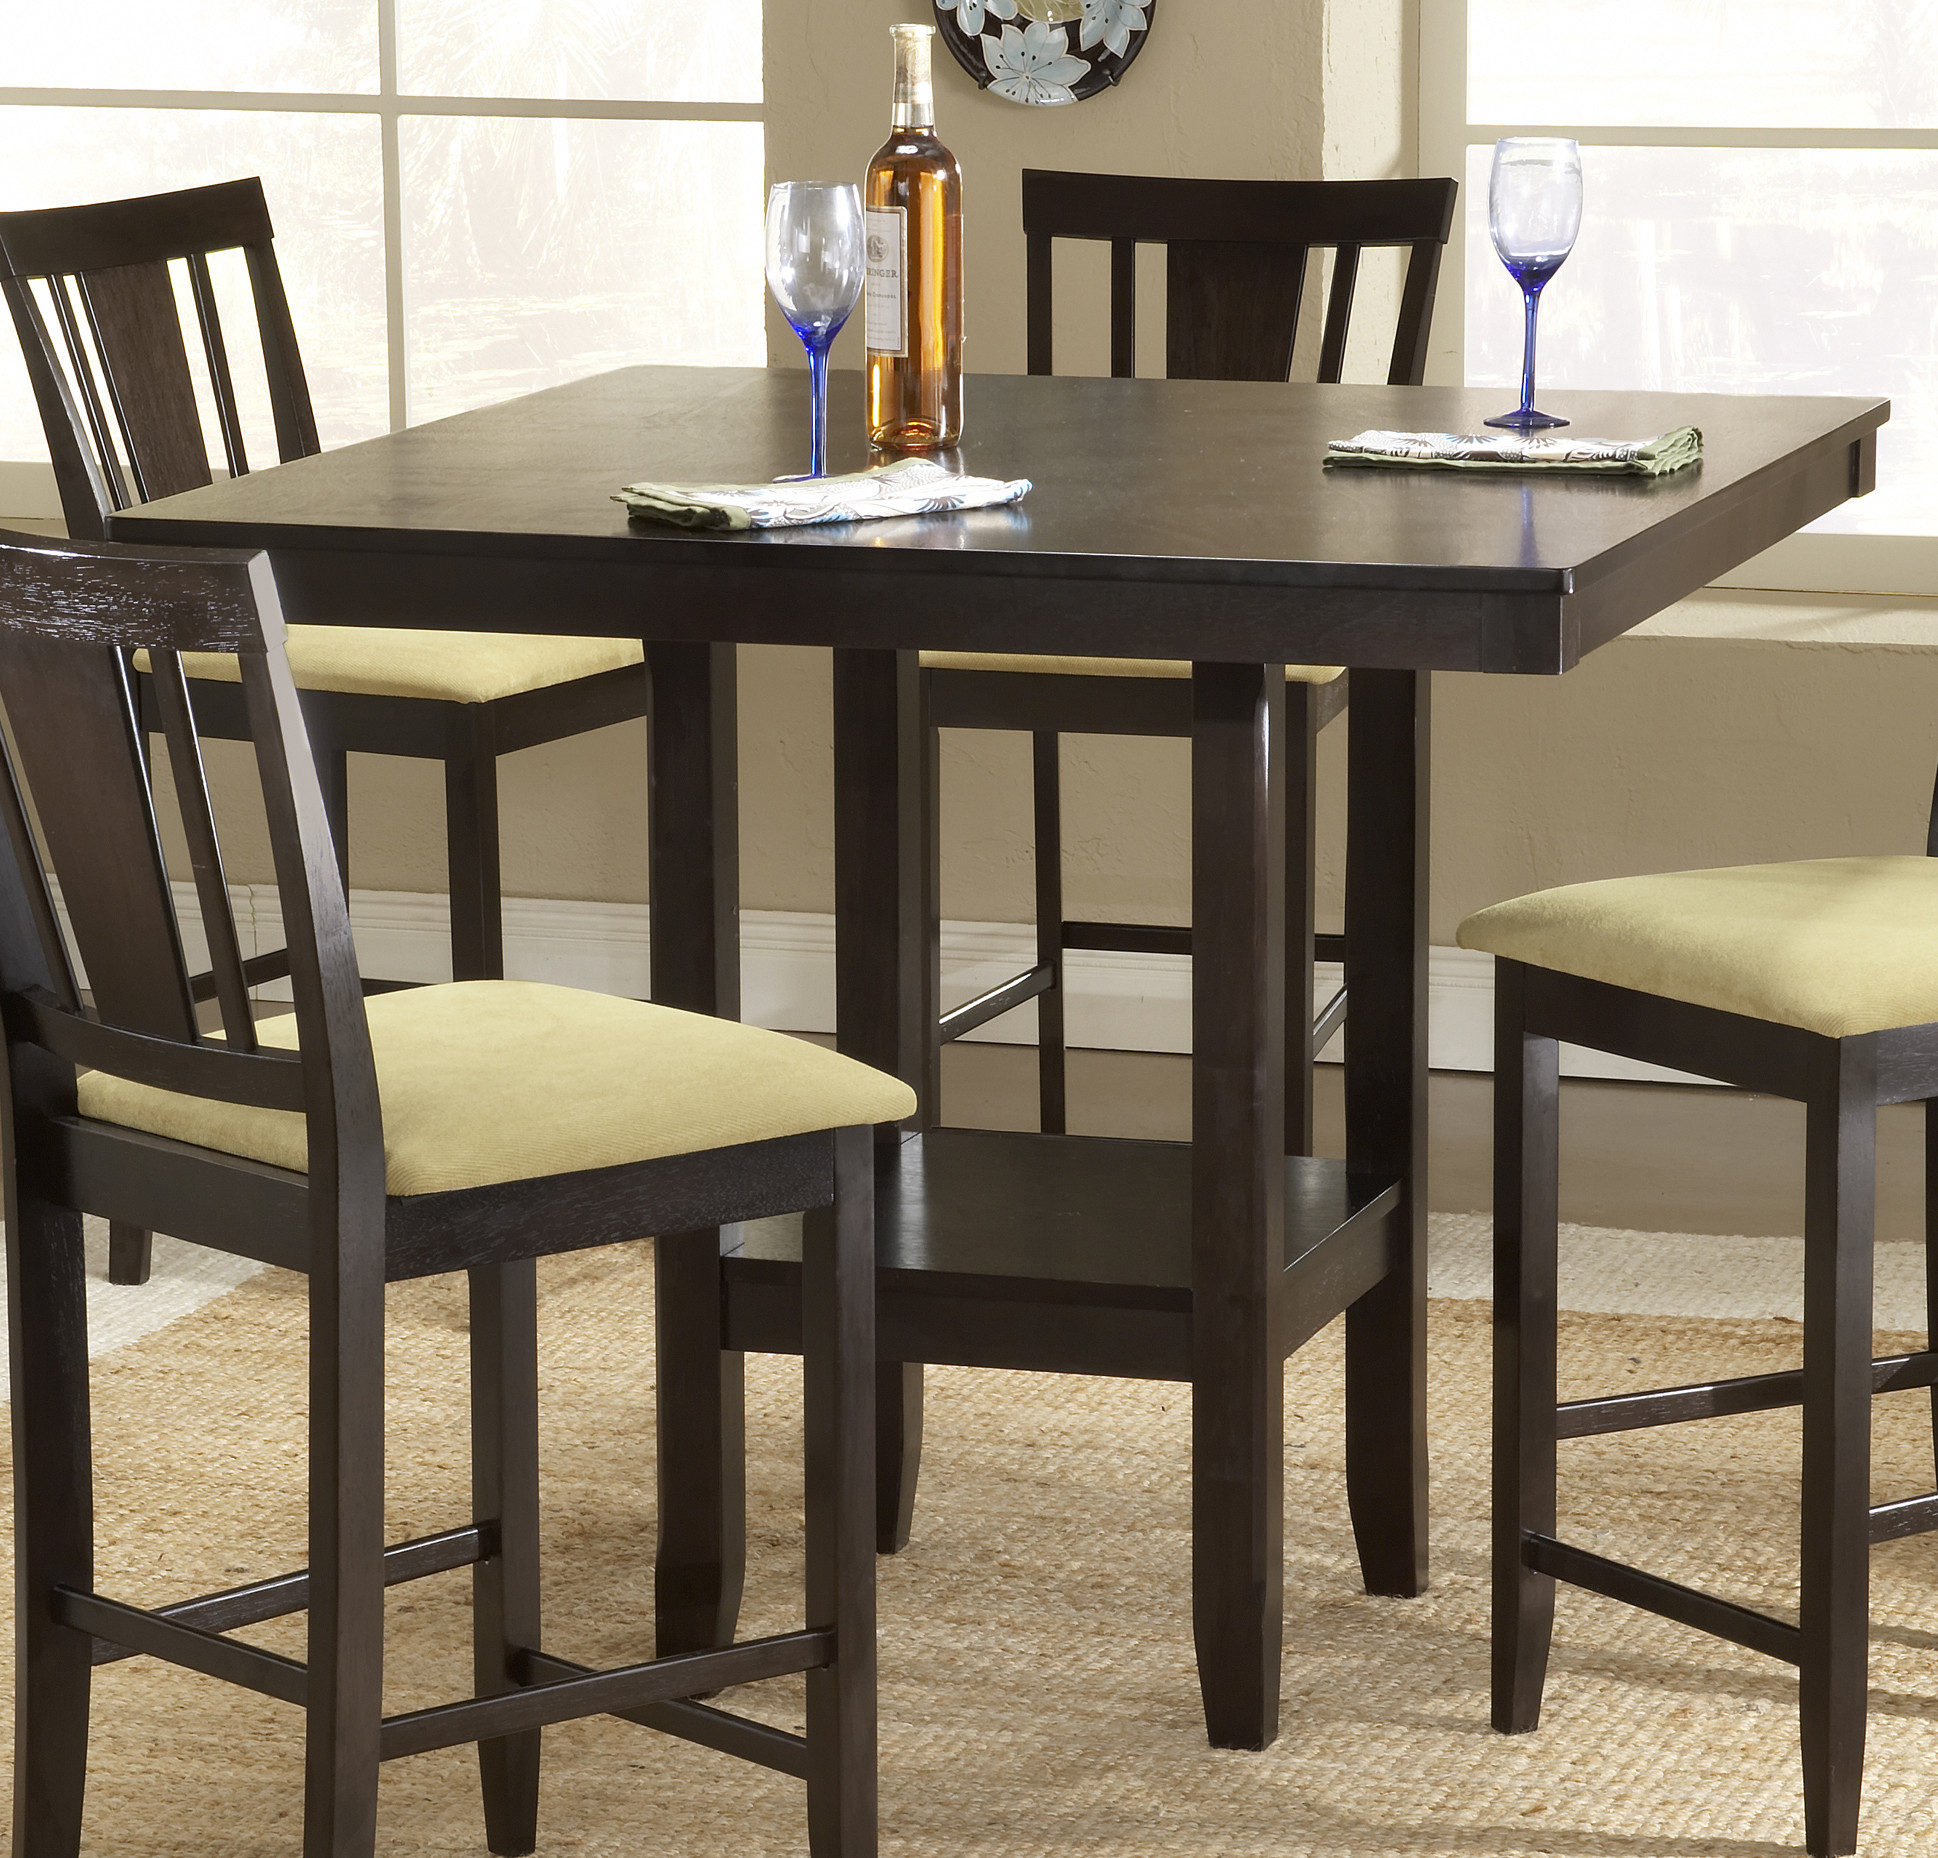 Counter Height Small Kitchen Table
 Counter Height Dinette Sets – HomesFeed